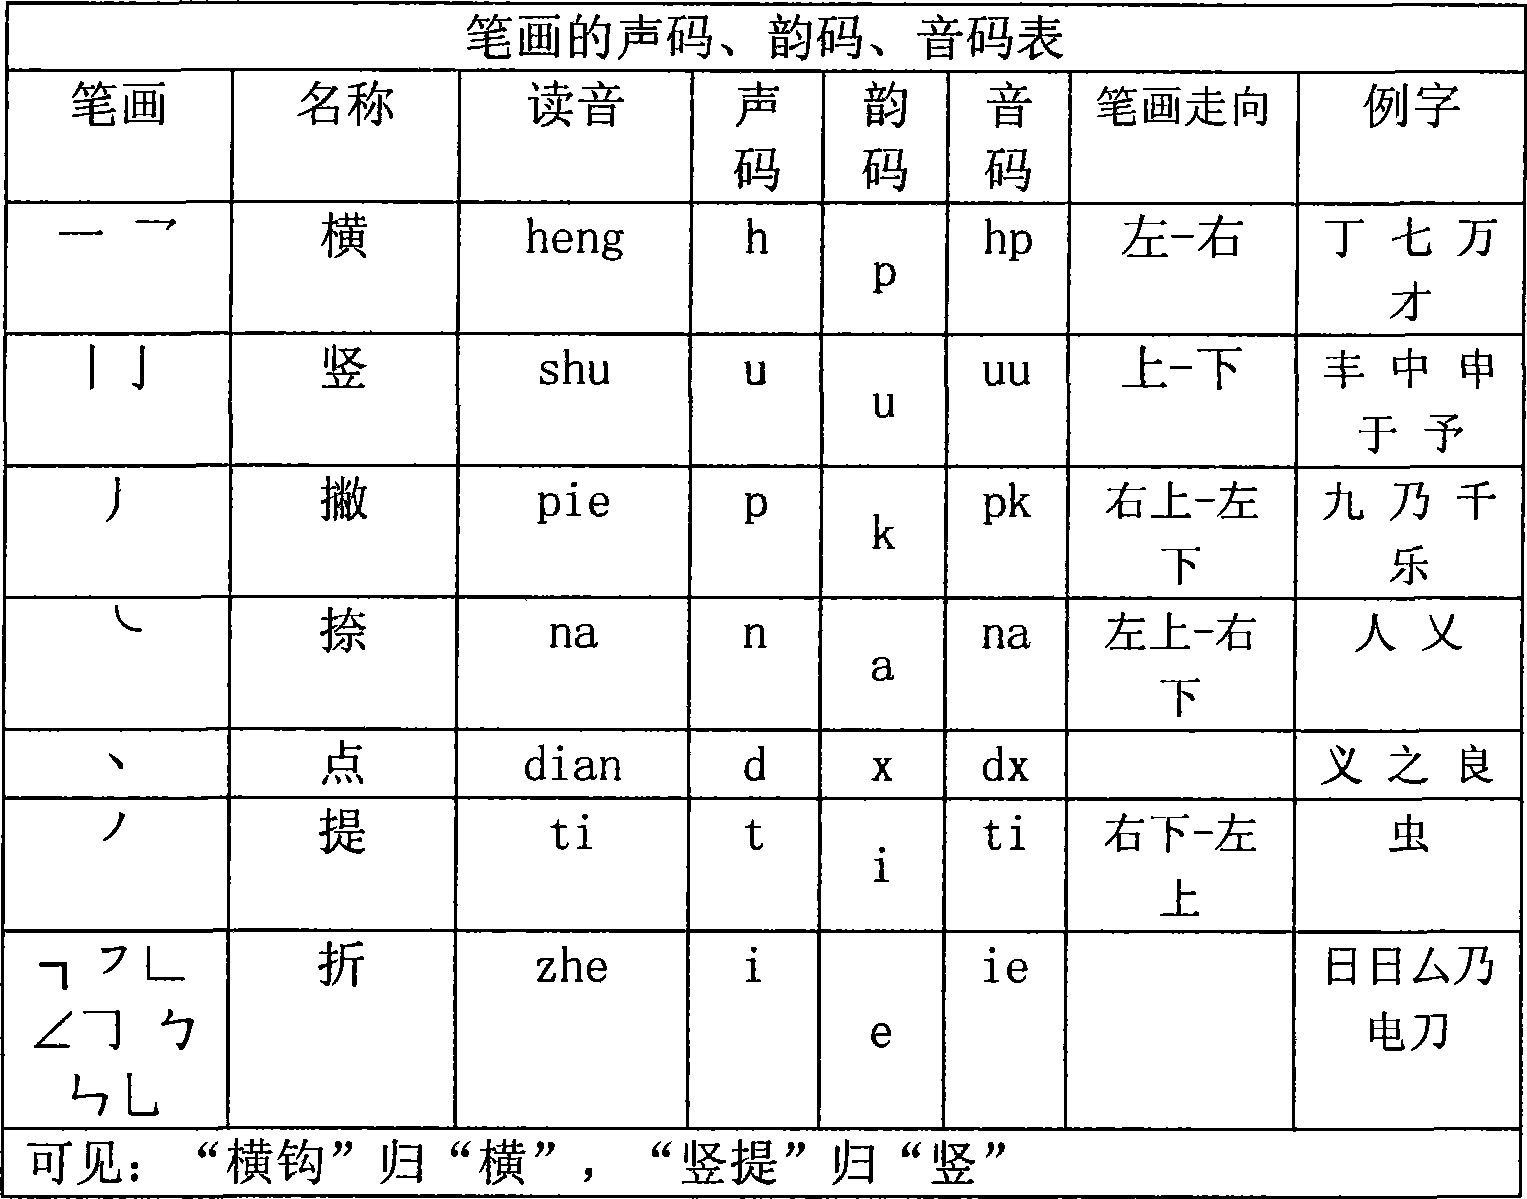 Chinese character simplified pinyin input method by computer alphabetical keyboard